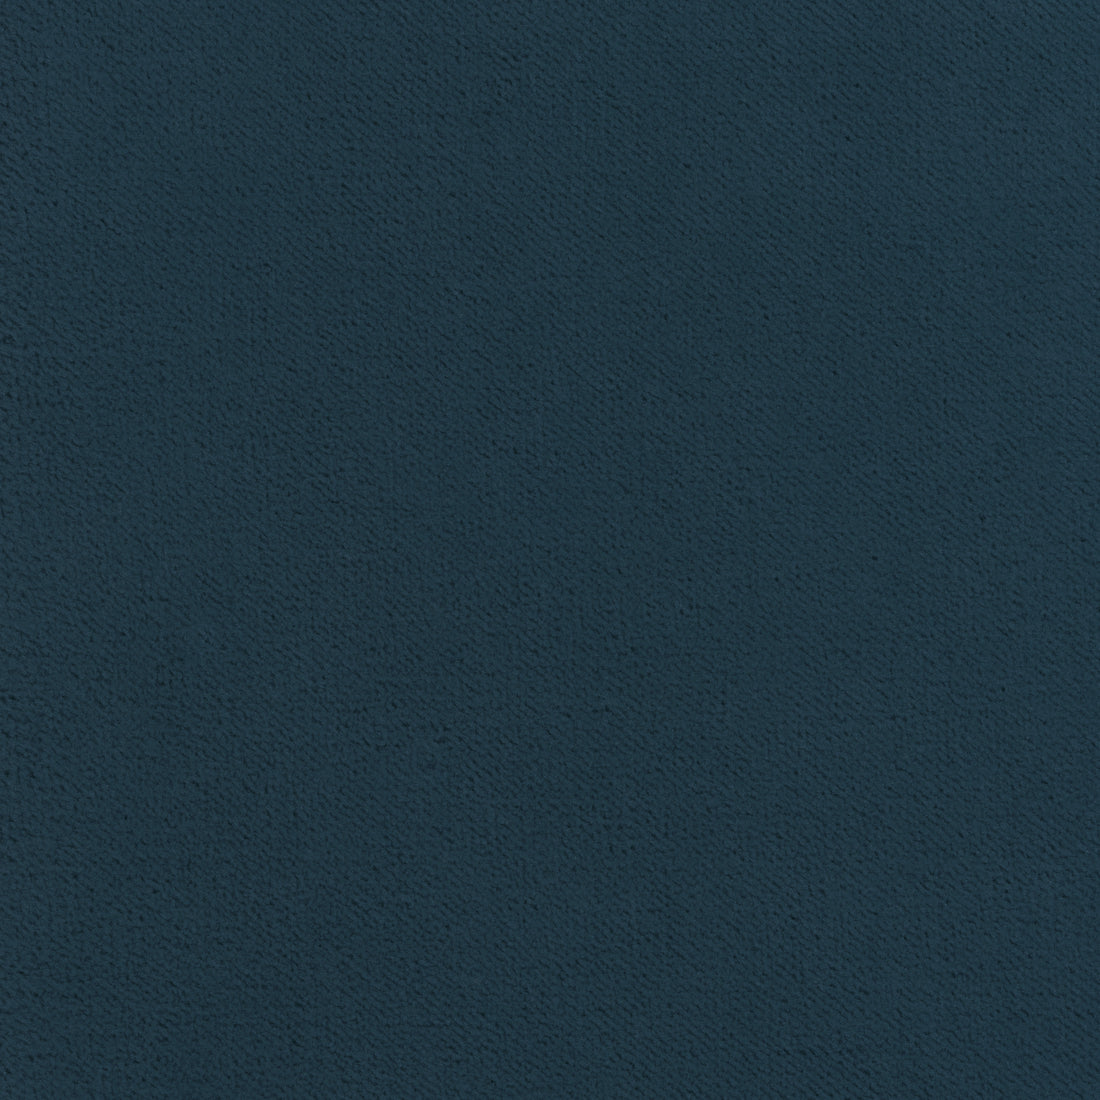 Club Velvet fabric in denim color - pattern number W7239 - by Thibaut in the Club Velvet collection